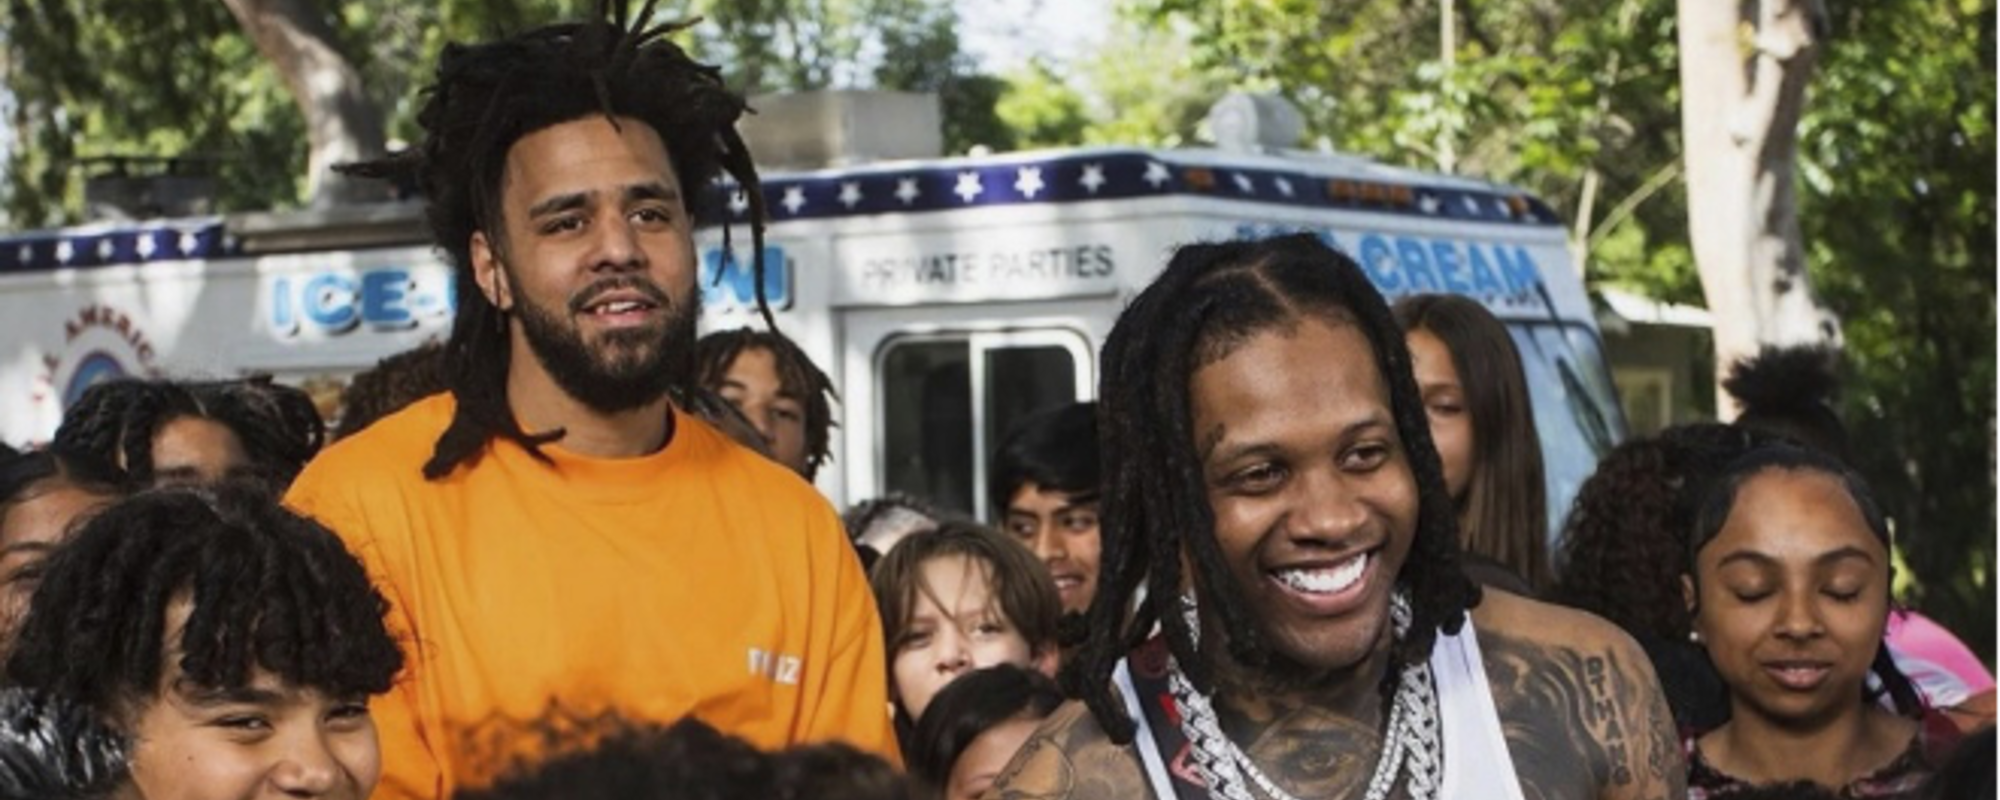 The Story Behind Lil Durk and J. Cole’s “All My Life”